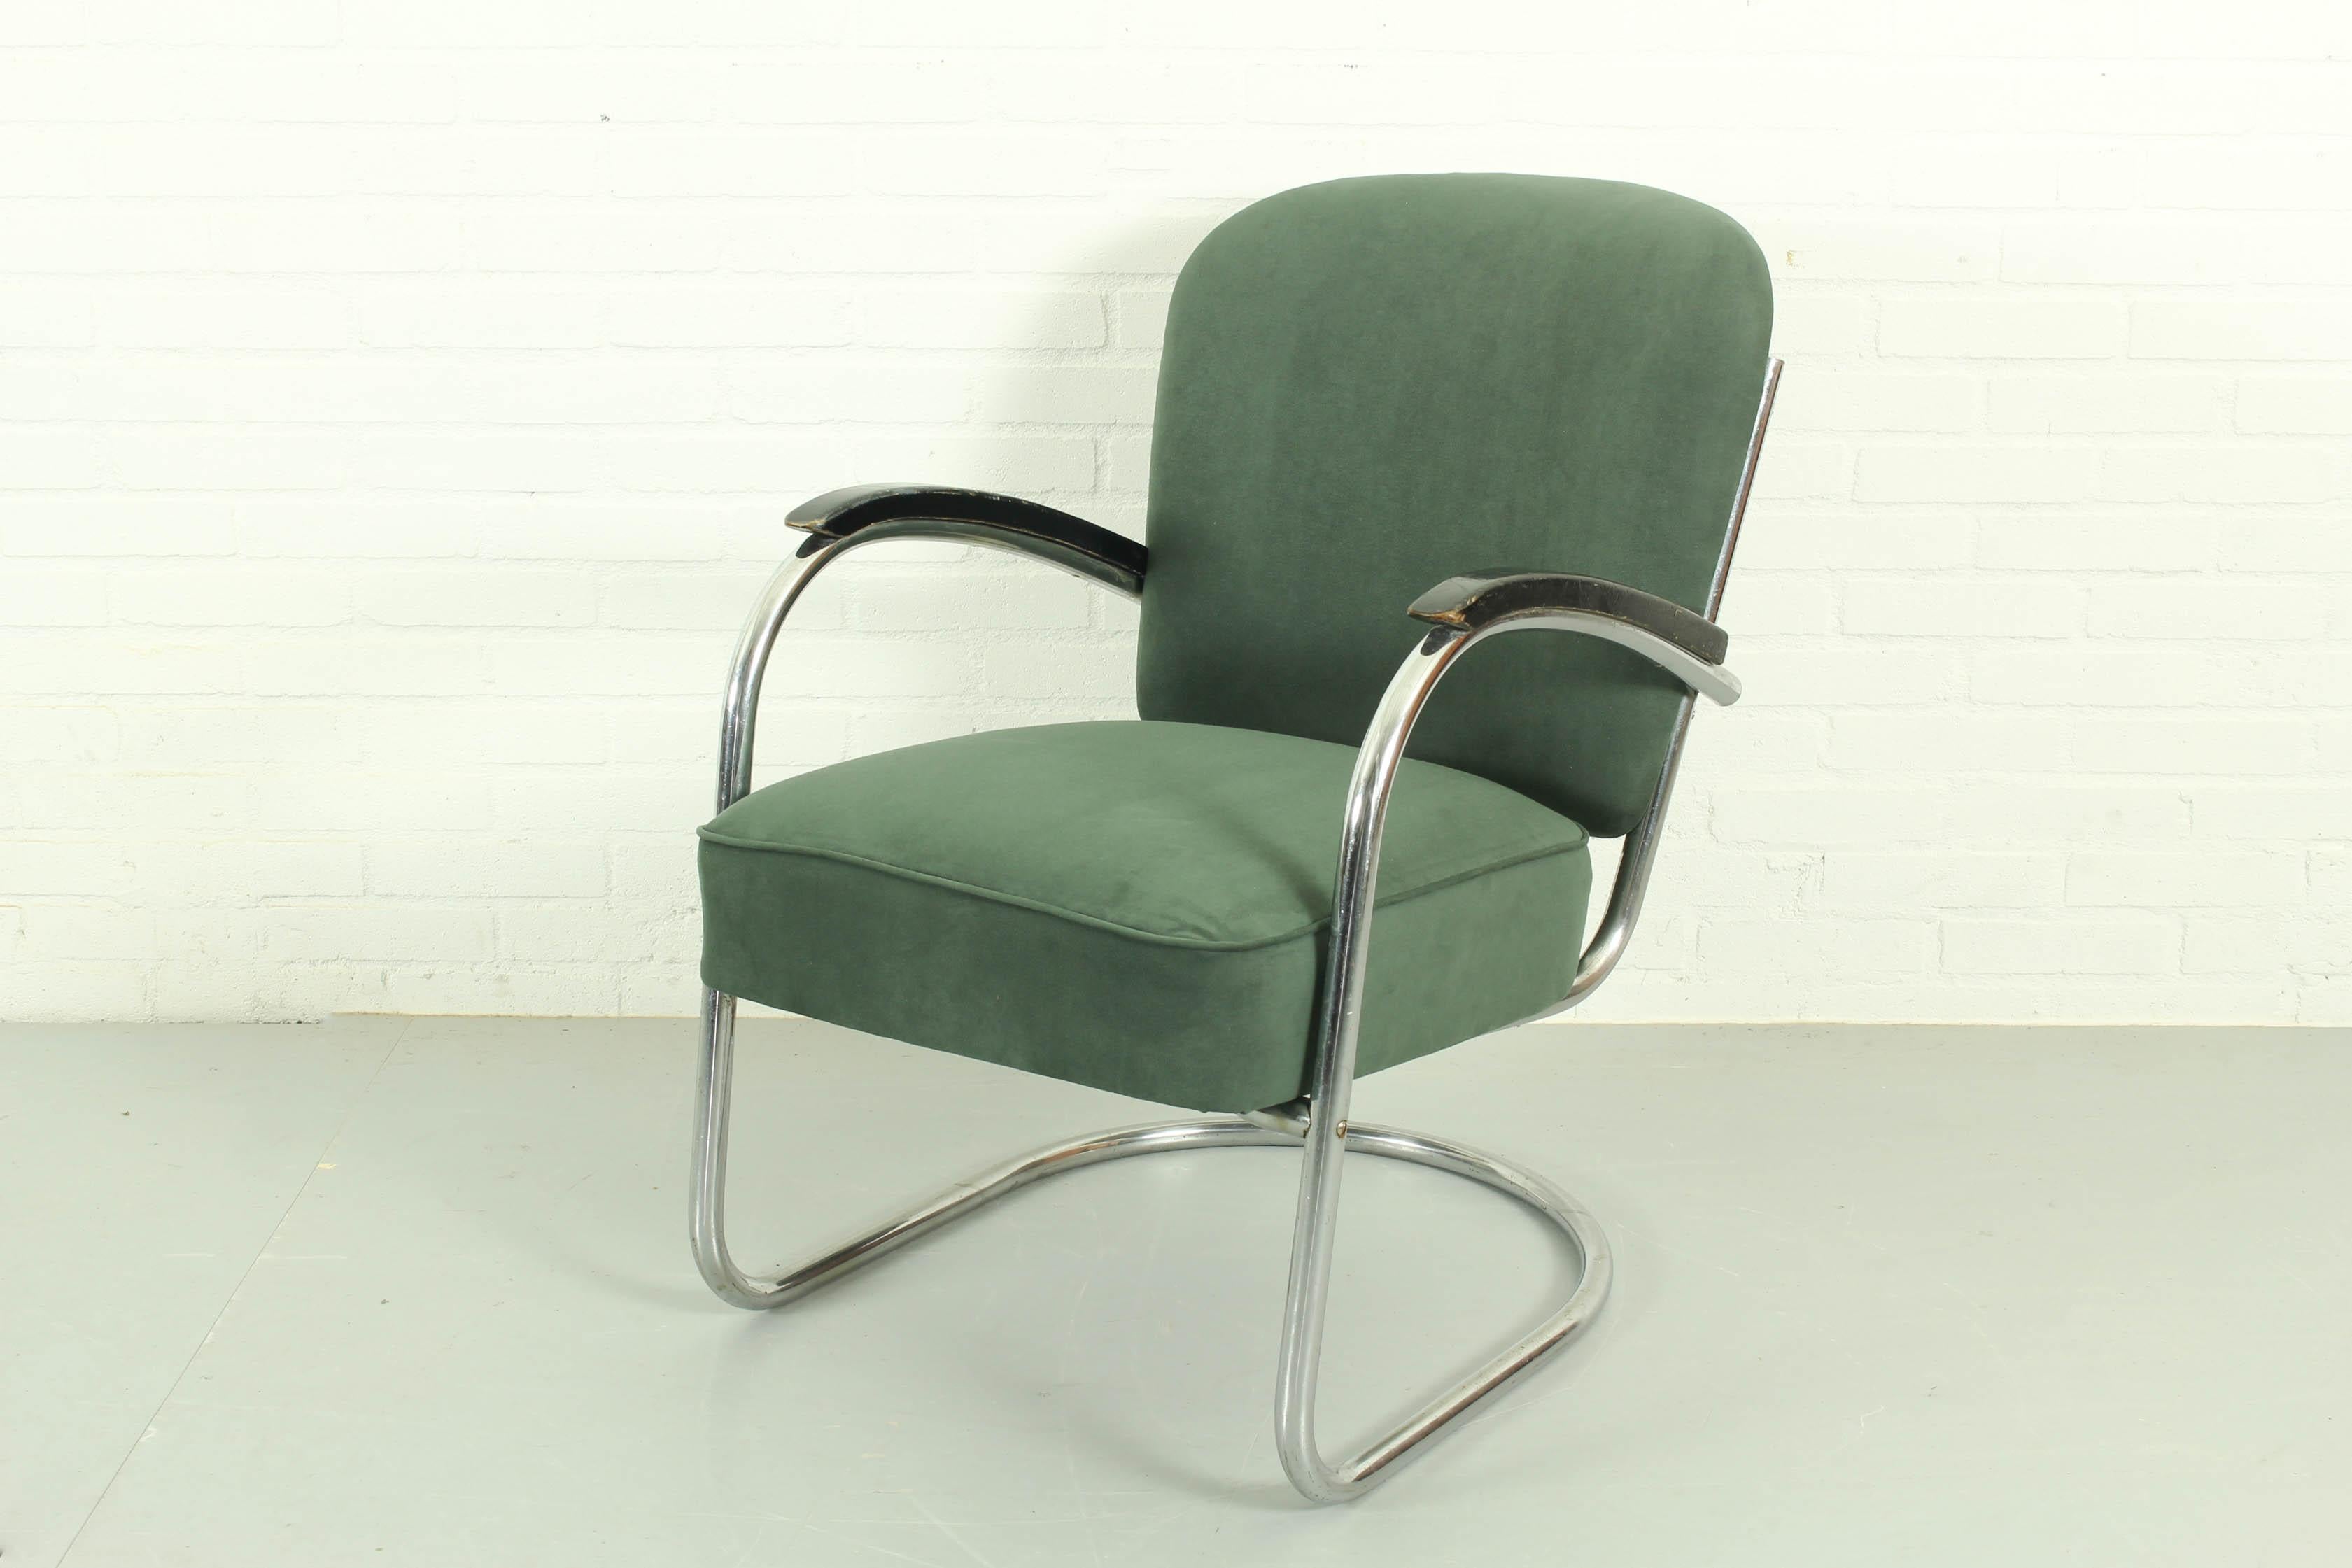 Stunning Dutch Tubular lounge chair designed by Paul Schuitema in the 1930s, 4 available. A very rare find because this is the original chair from the 1930s. It is reupholstered and in very good condition. Designed by Paul Schuitema for D3